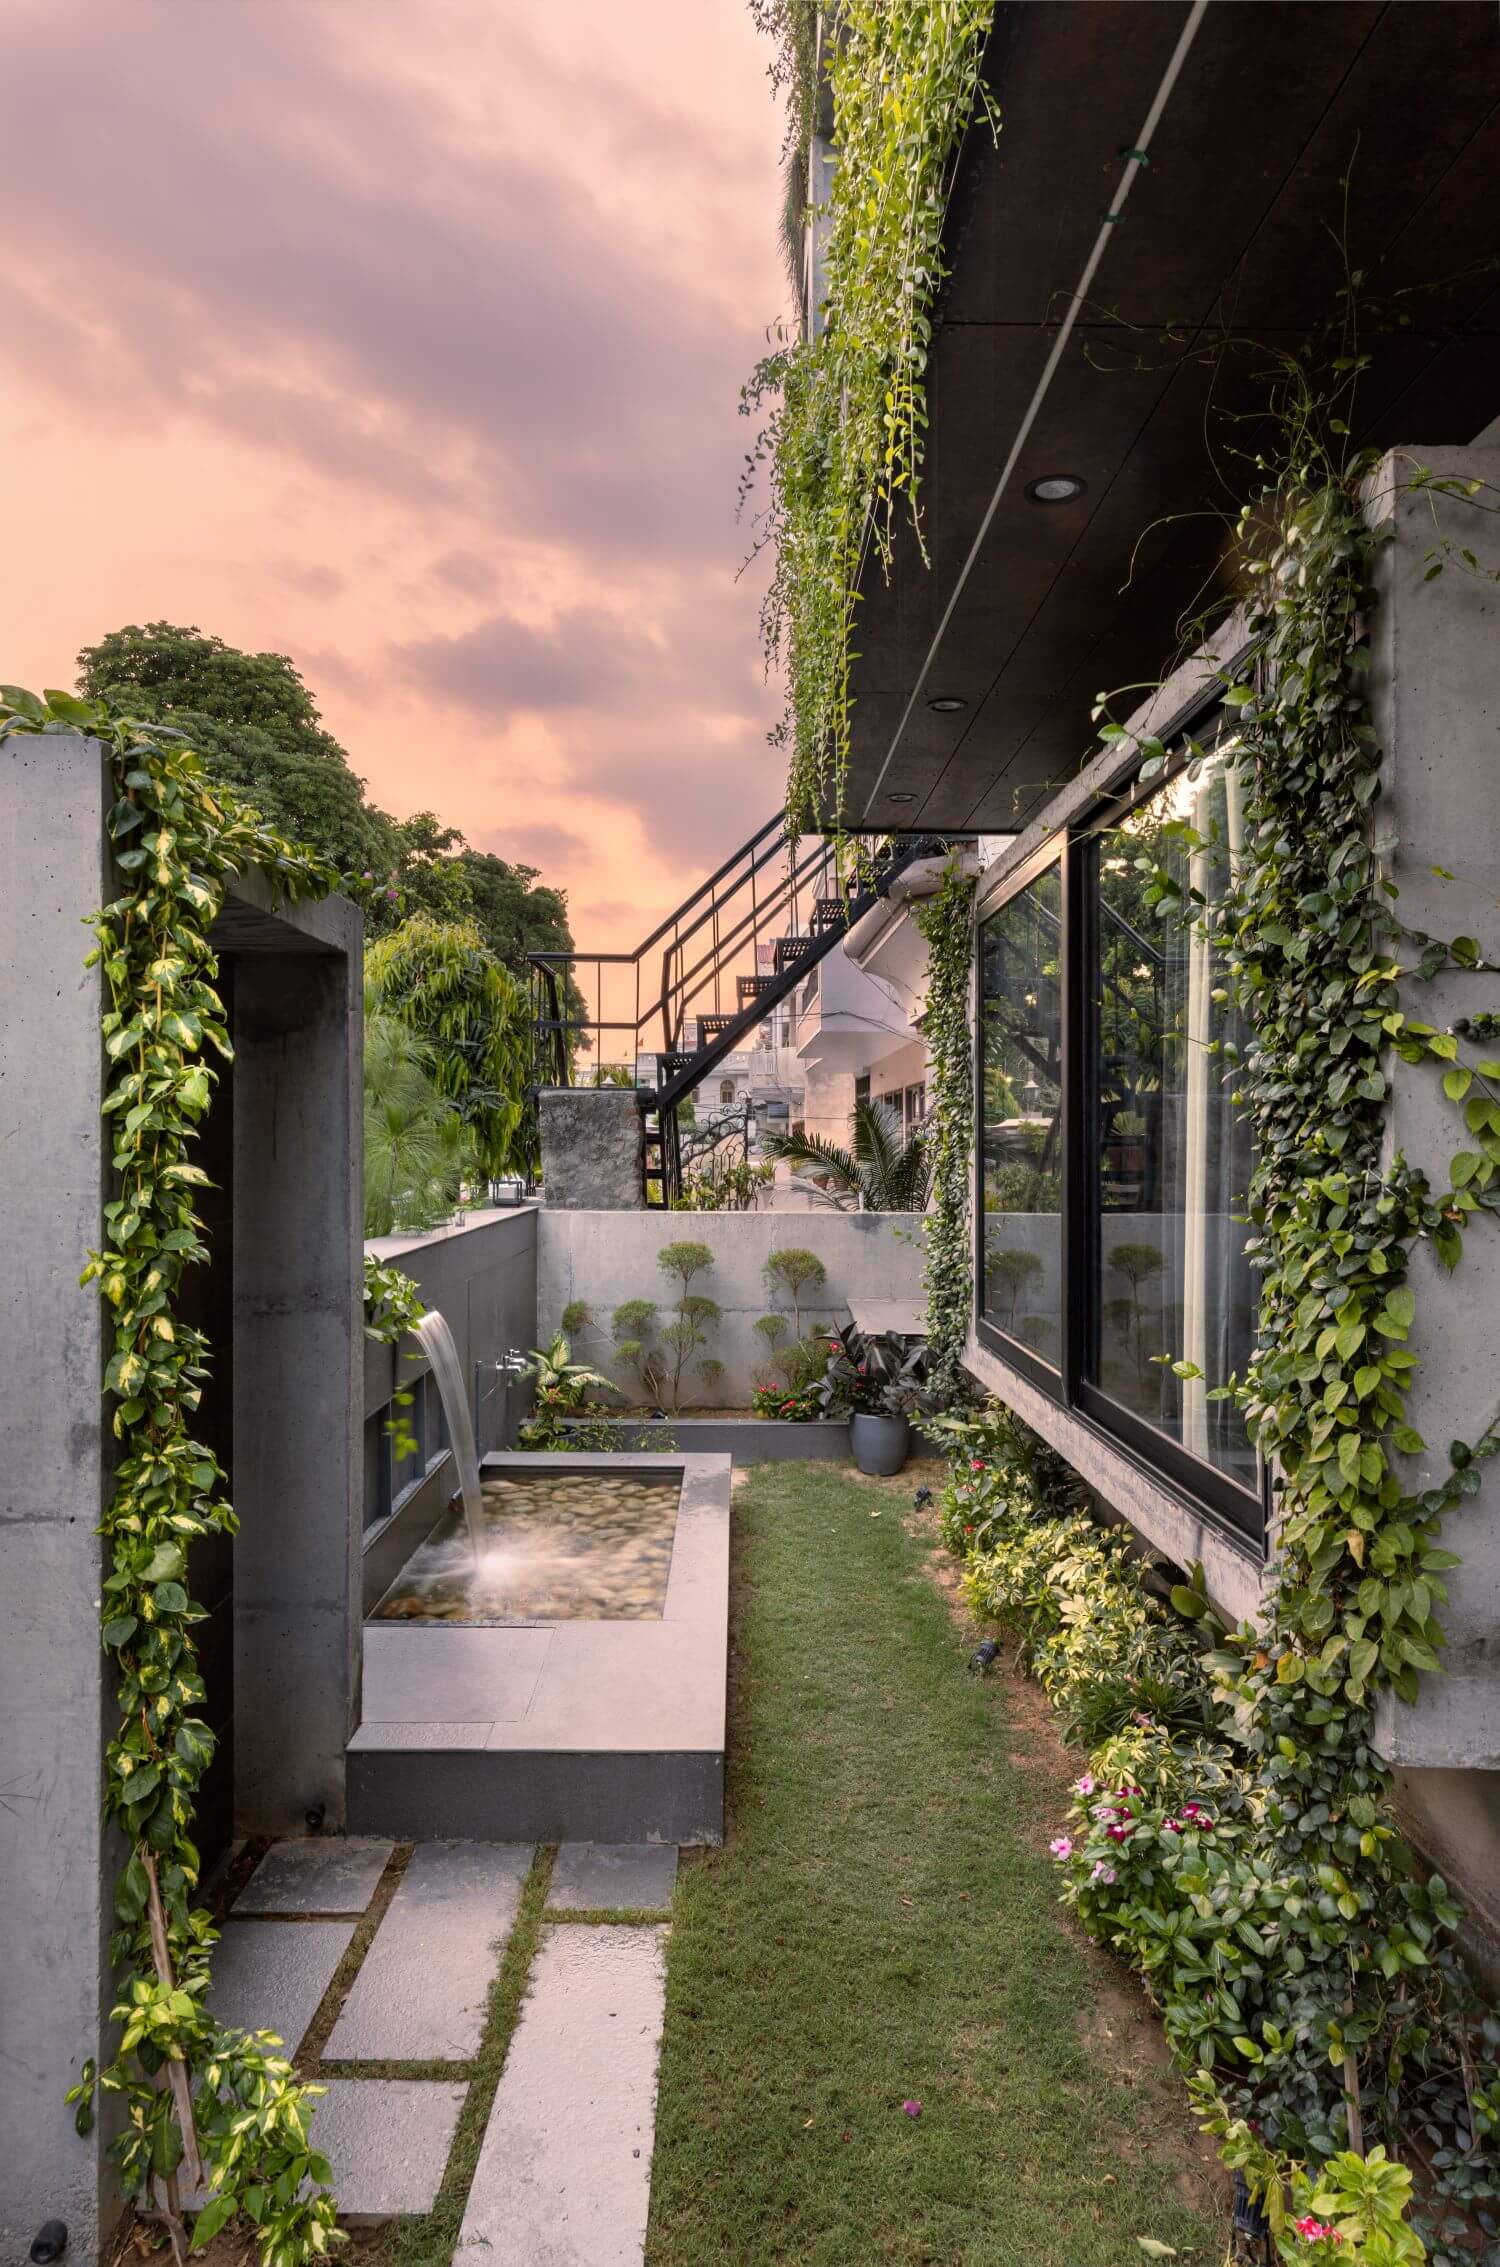 Nature’s abode residence in Shahabad, Ha|Houses